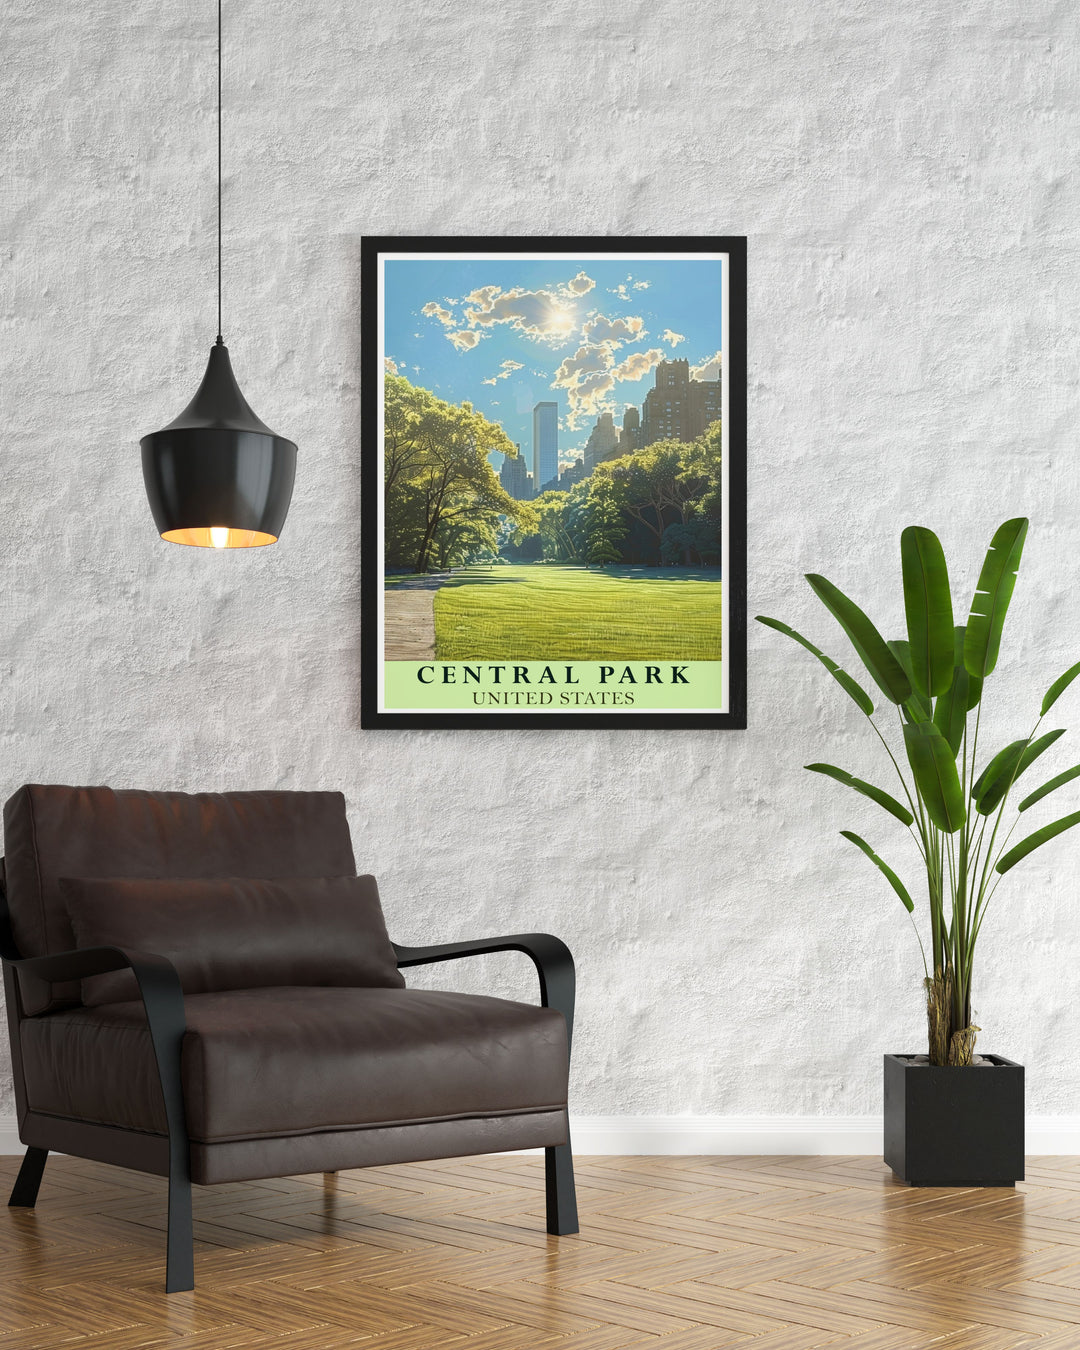 Highlighting the serene vistas of Central Parks Lawn and the bustling atmosphere of the park, this travel poster is perfect for those who appreciate the scenic and historical richness of New York.